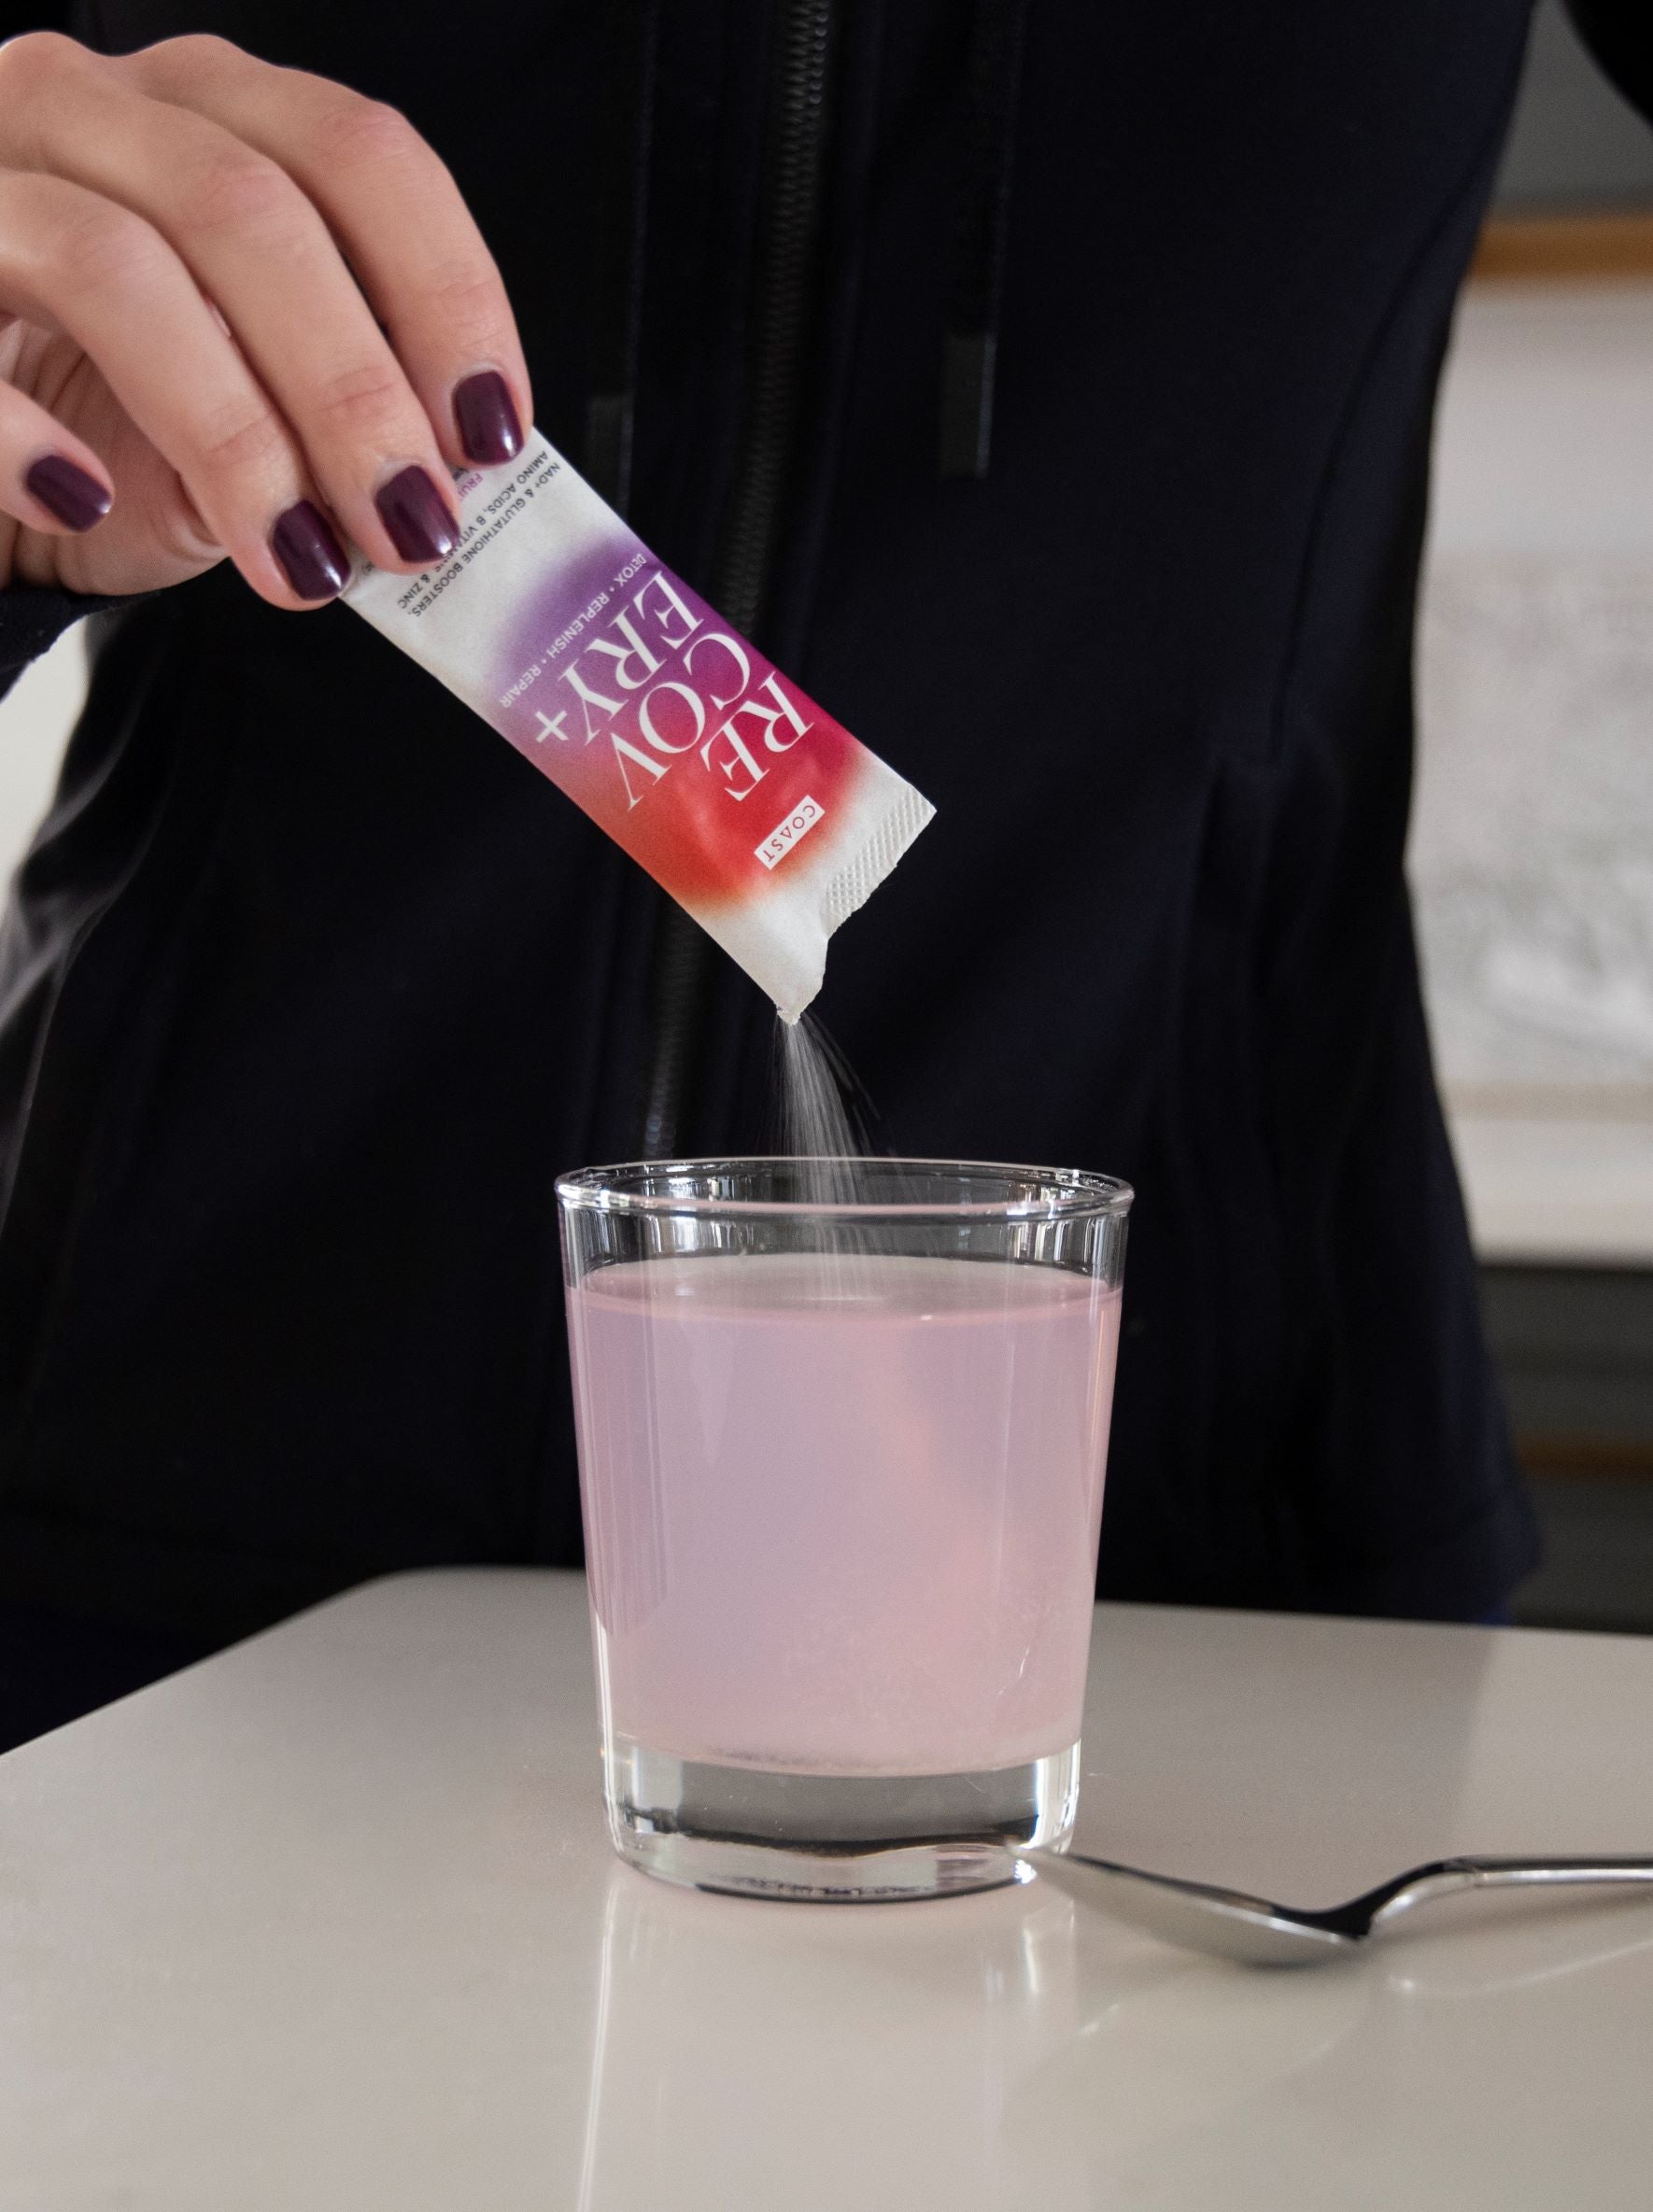 COAST Recovery+ powder stick being poured into glass of water. Drink COAST Recovery+ daily to recover better by flushing out toxins, replenishing lost nutrients, and repairing cells. NAD+ and glutathione.